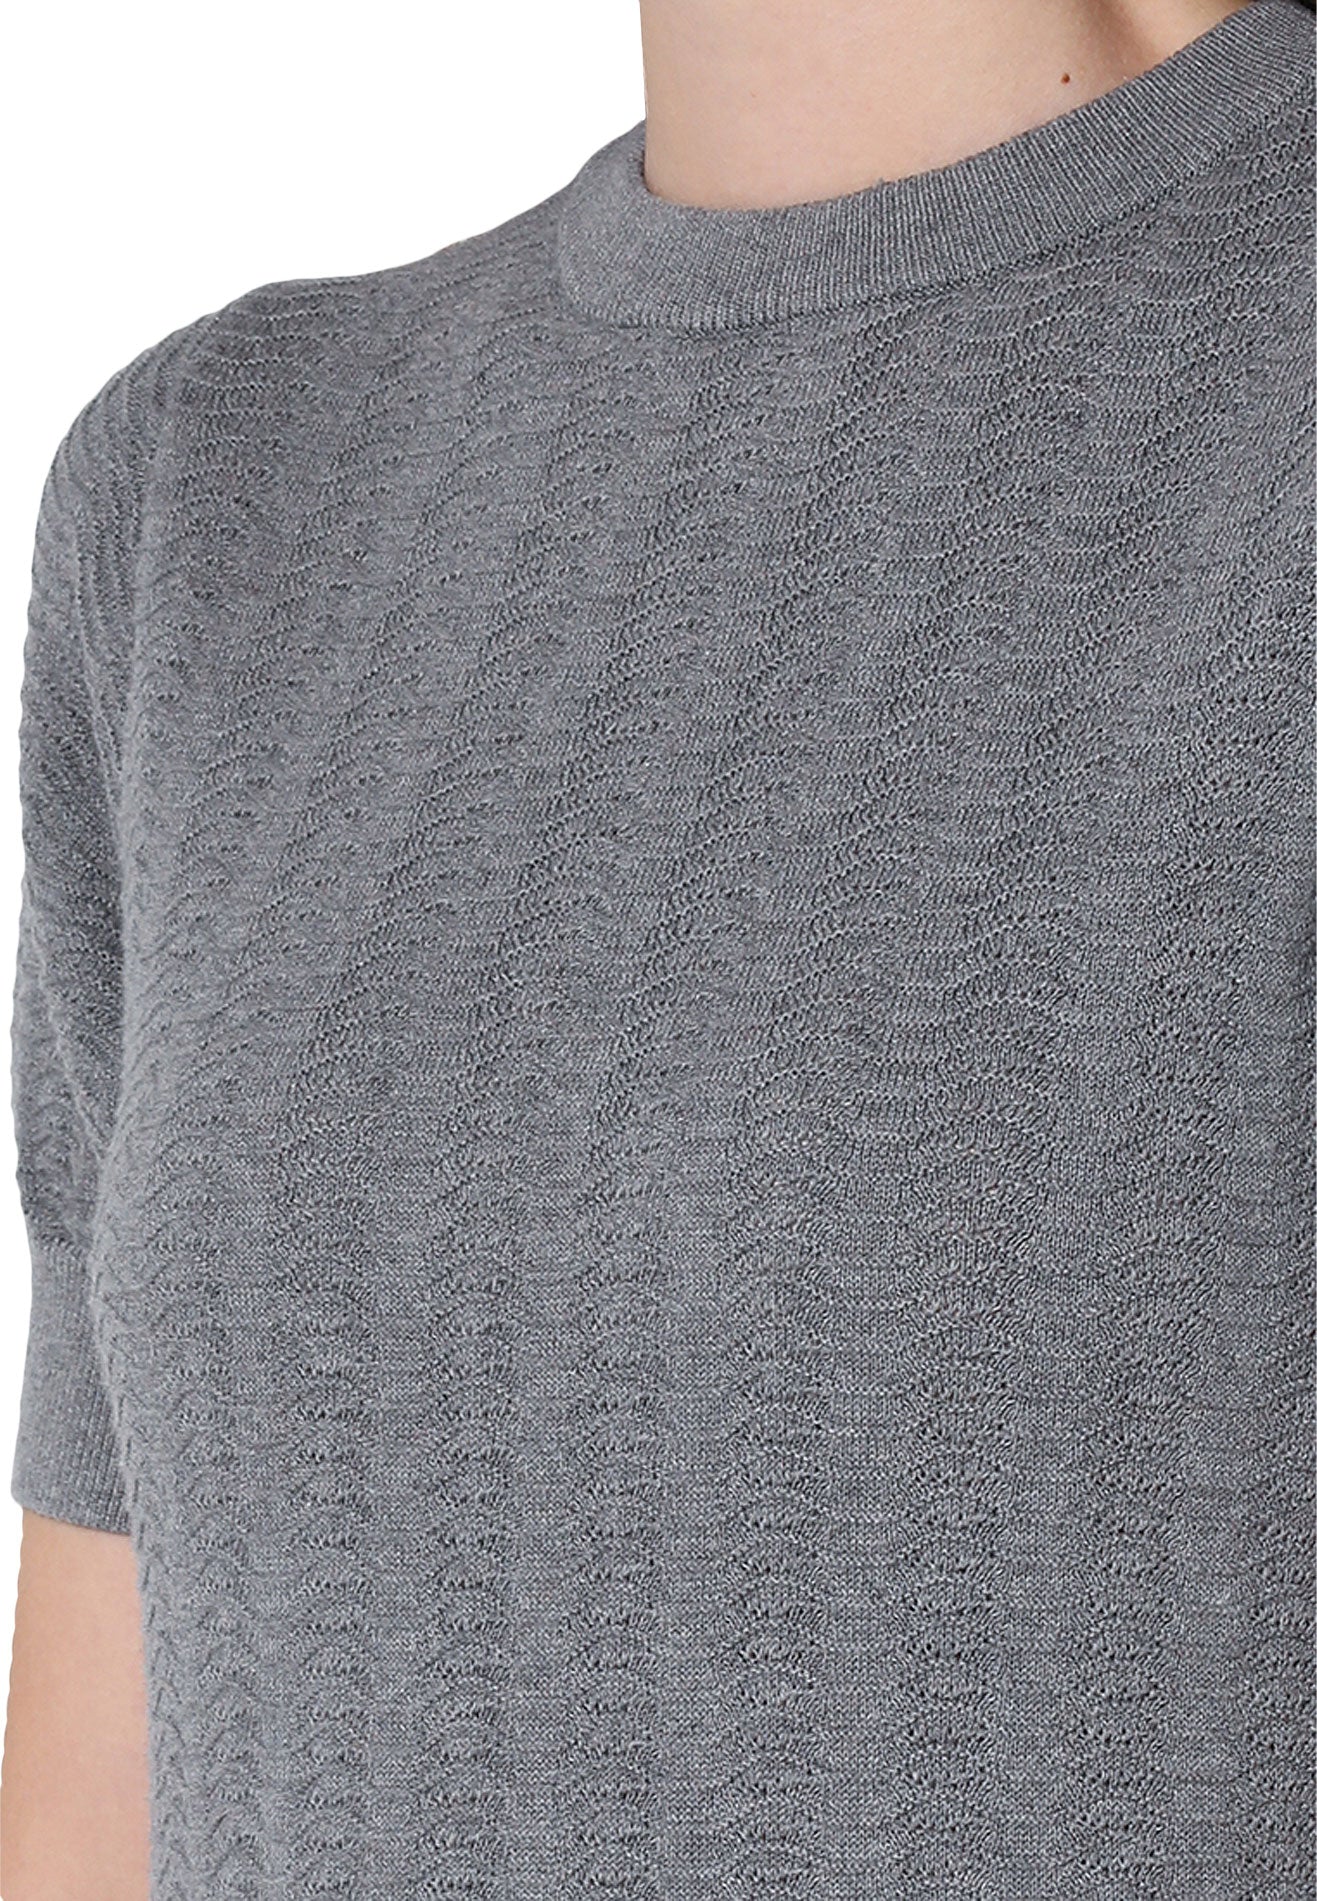 VOIR JEANS Weave Ribbed Yarn Knit Top